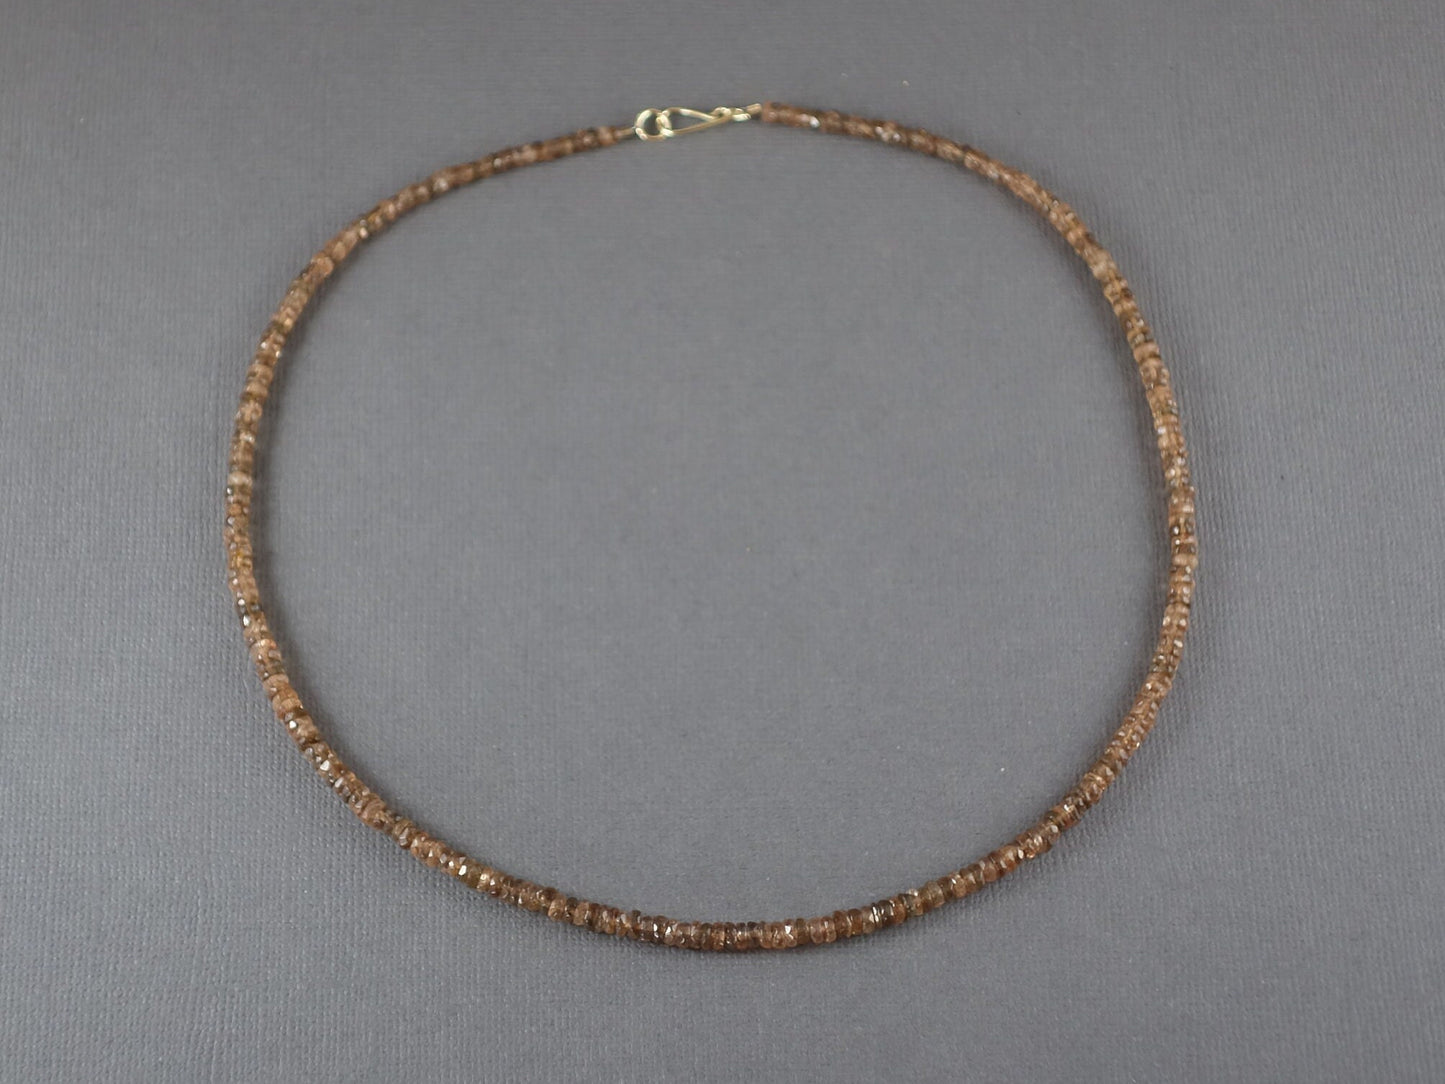 Andalusite Necklace with 14k Gold Clasp, Beaded Andalusite Necklace, 18 inches, Peach Necklace, Brown Necklace, Khaki Necklace,